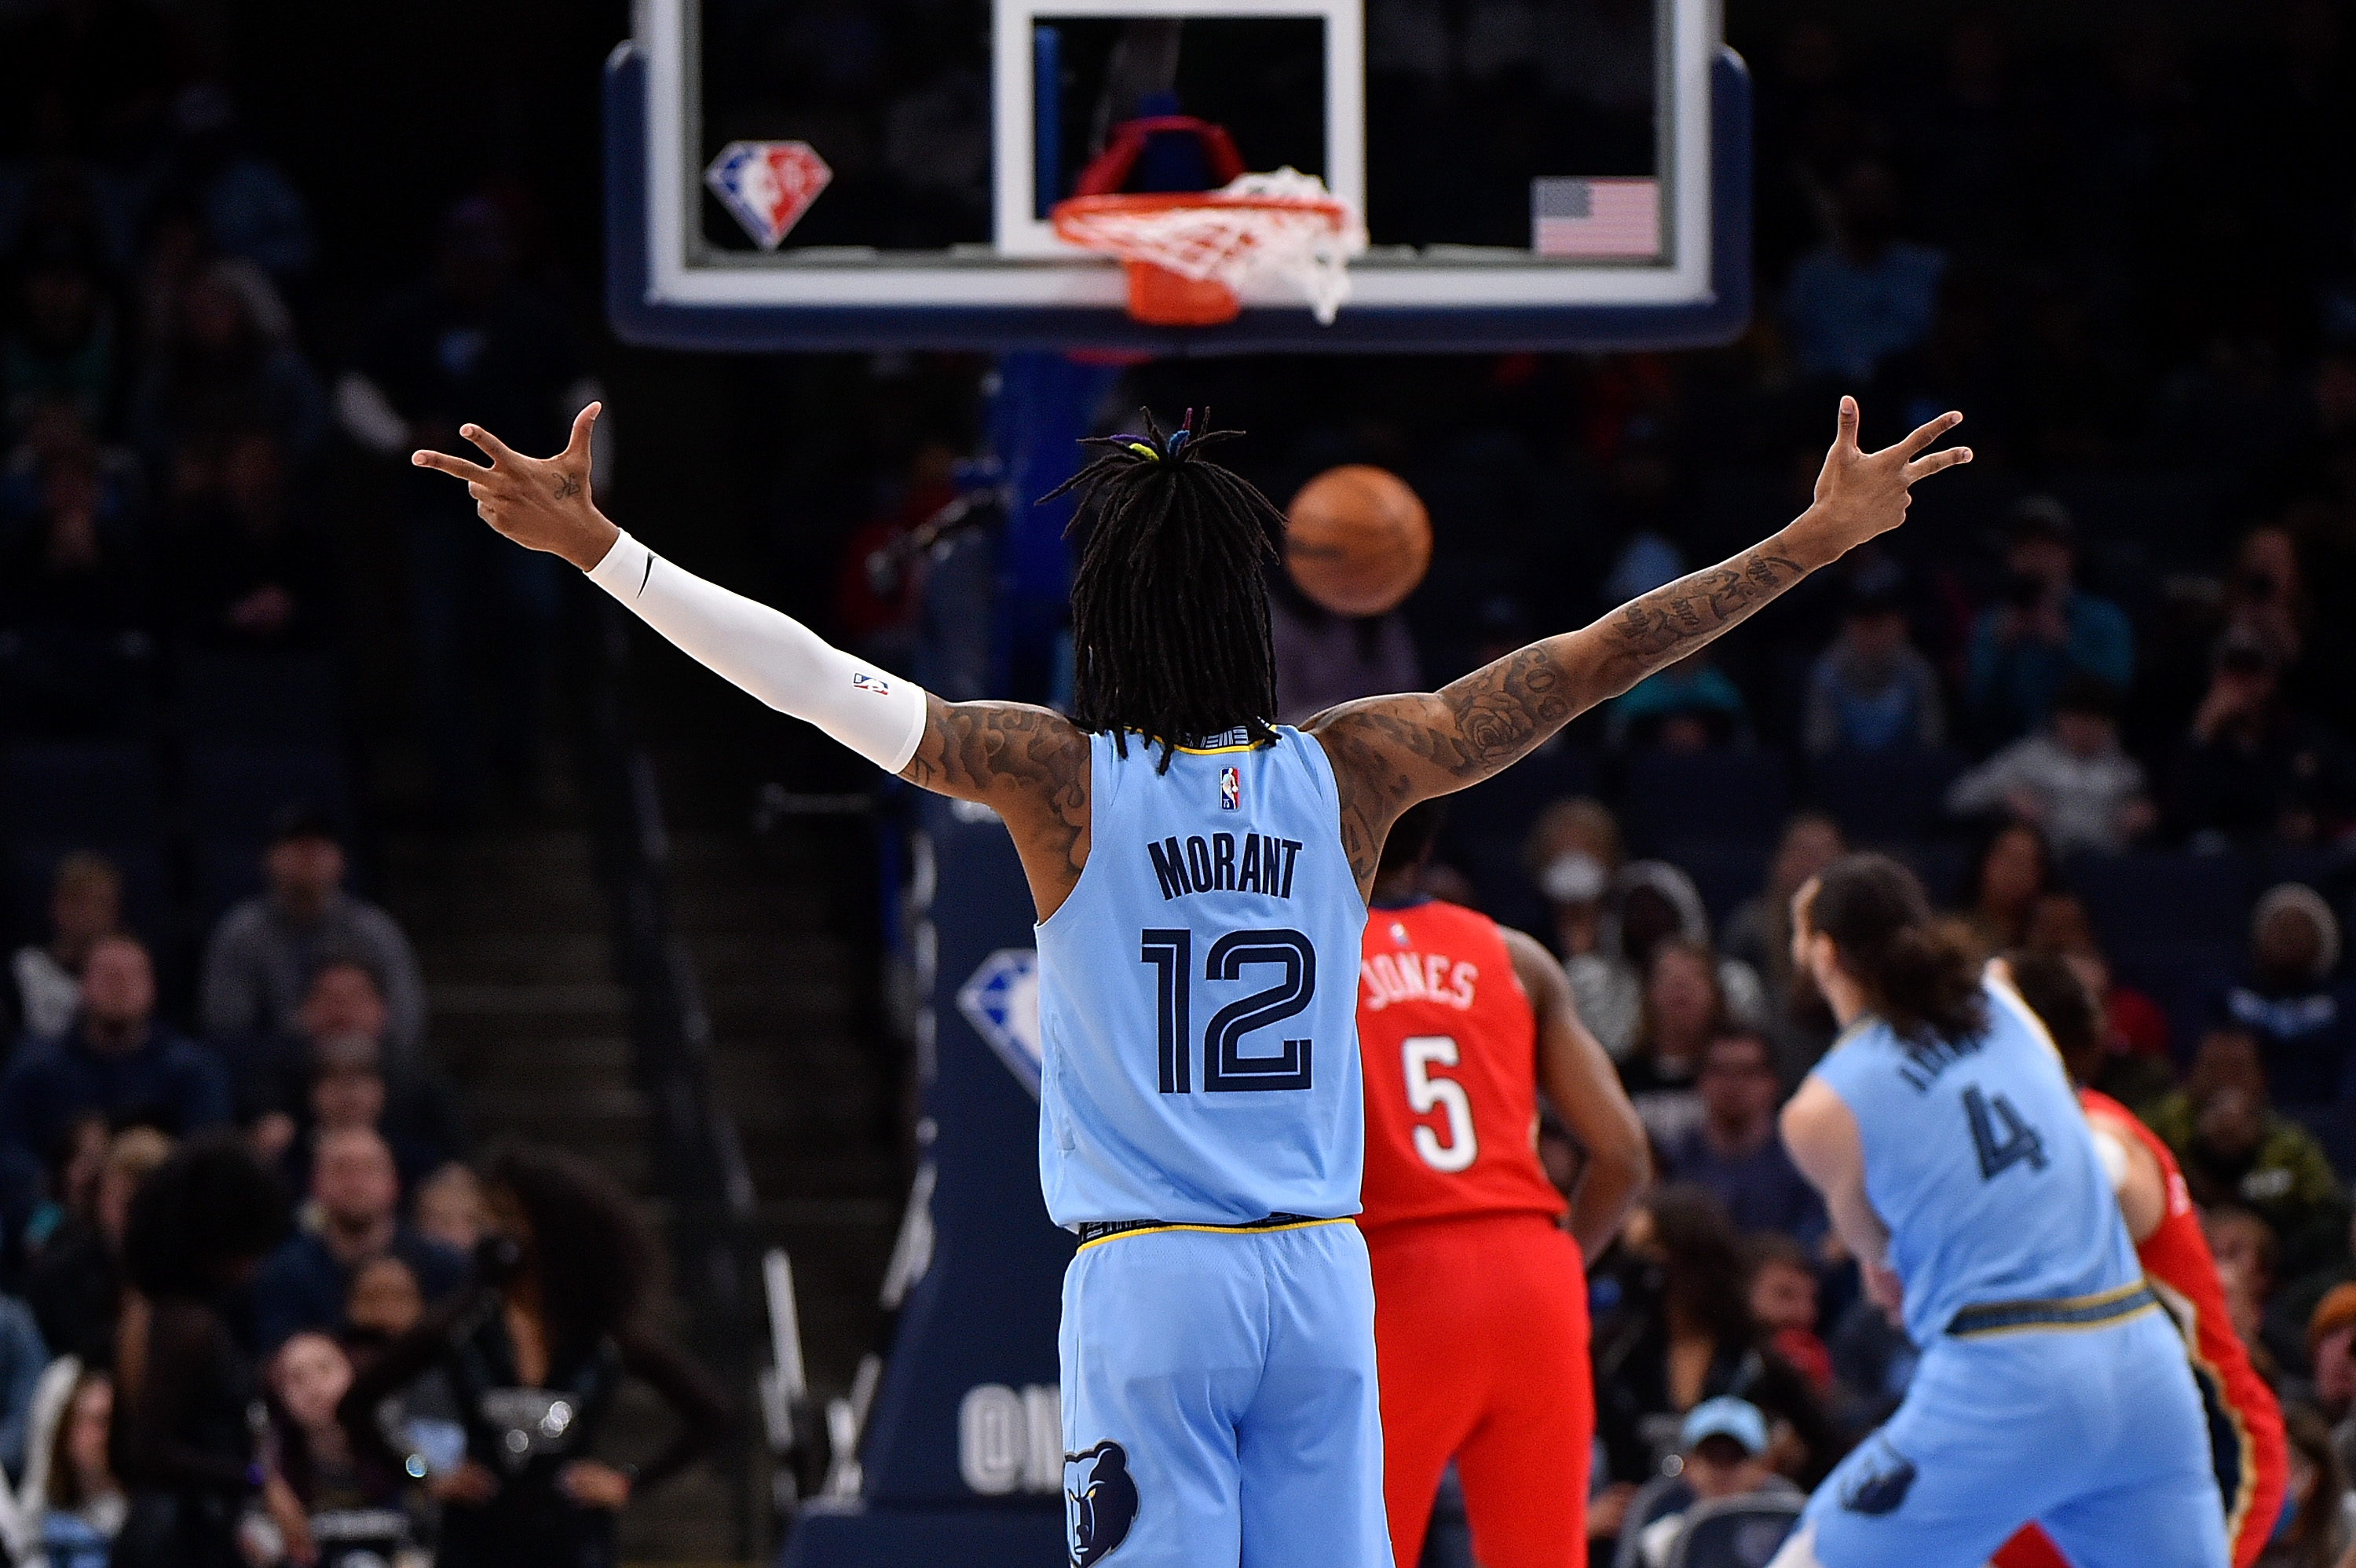 Memphis Grizzlies star Ja Morant reacts to a basket during an NBA game against the New Orleans Pelicans during an NBA game in March 2022